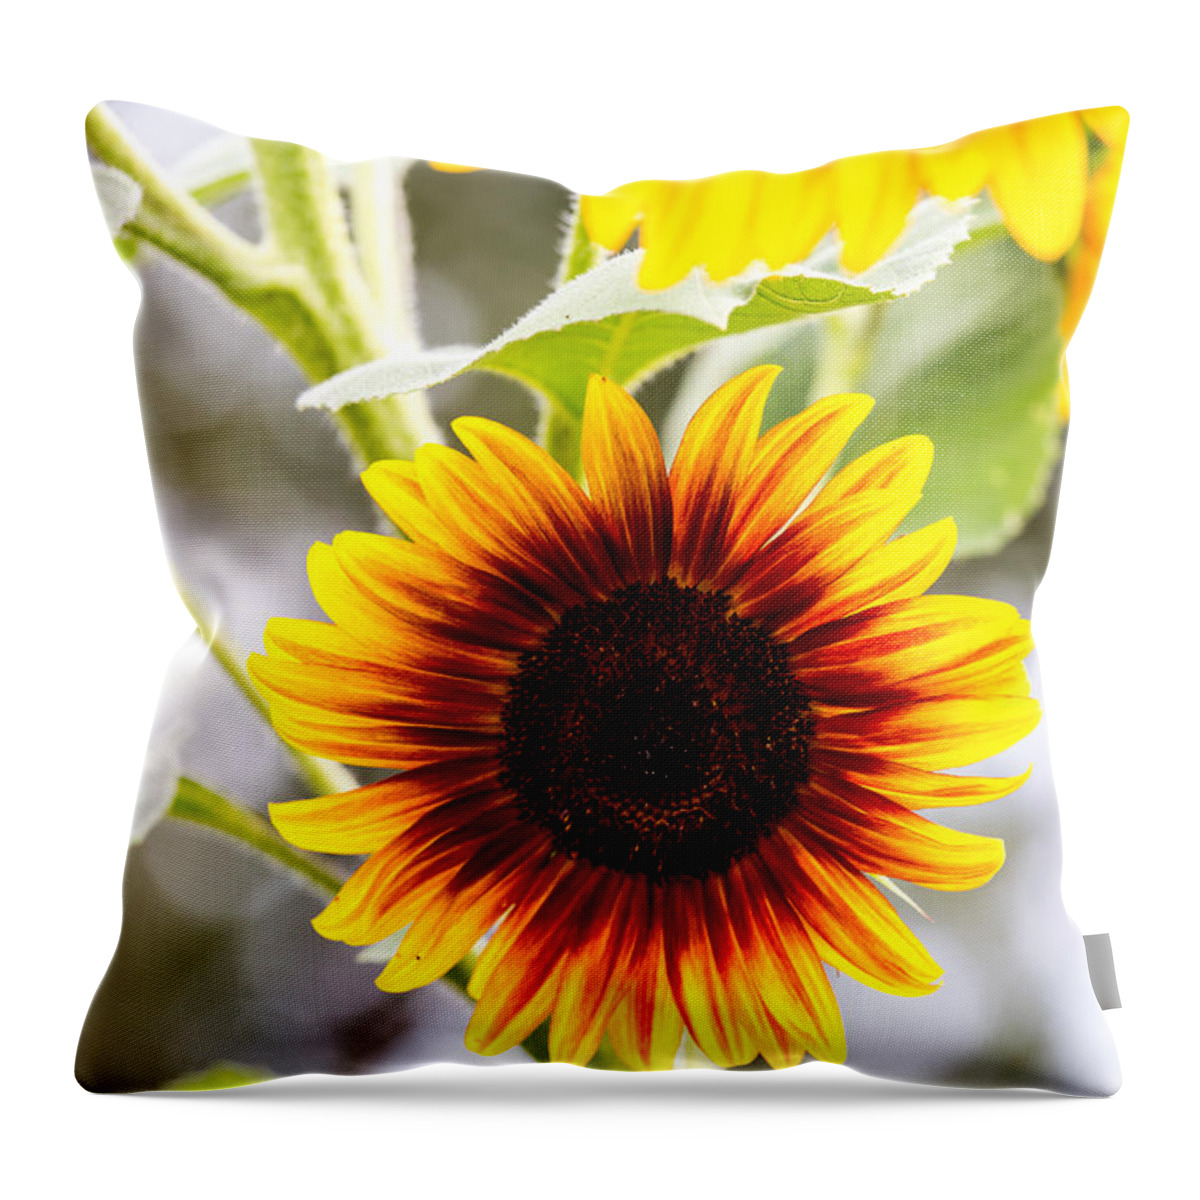 Sunflower Throw Pillow featuring the photograph Sunflower by Charles Hite